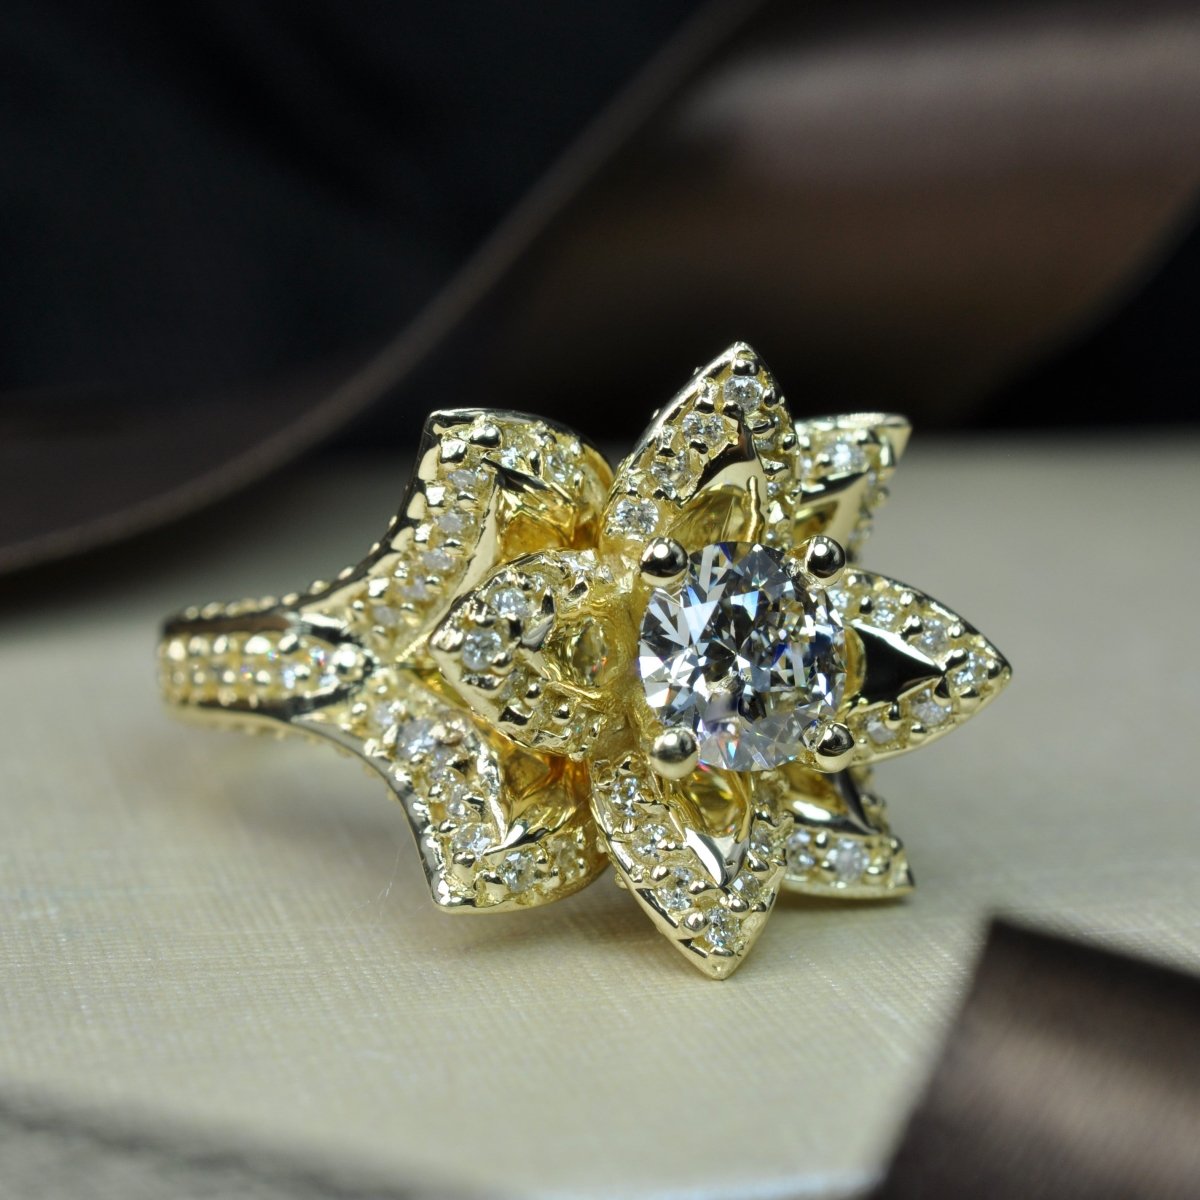 Certified 2.22 CT Round Cut Diamond Engagement Ring in 14 KT Yellow Gold - Primestyle.com